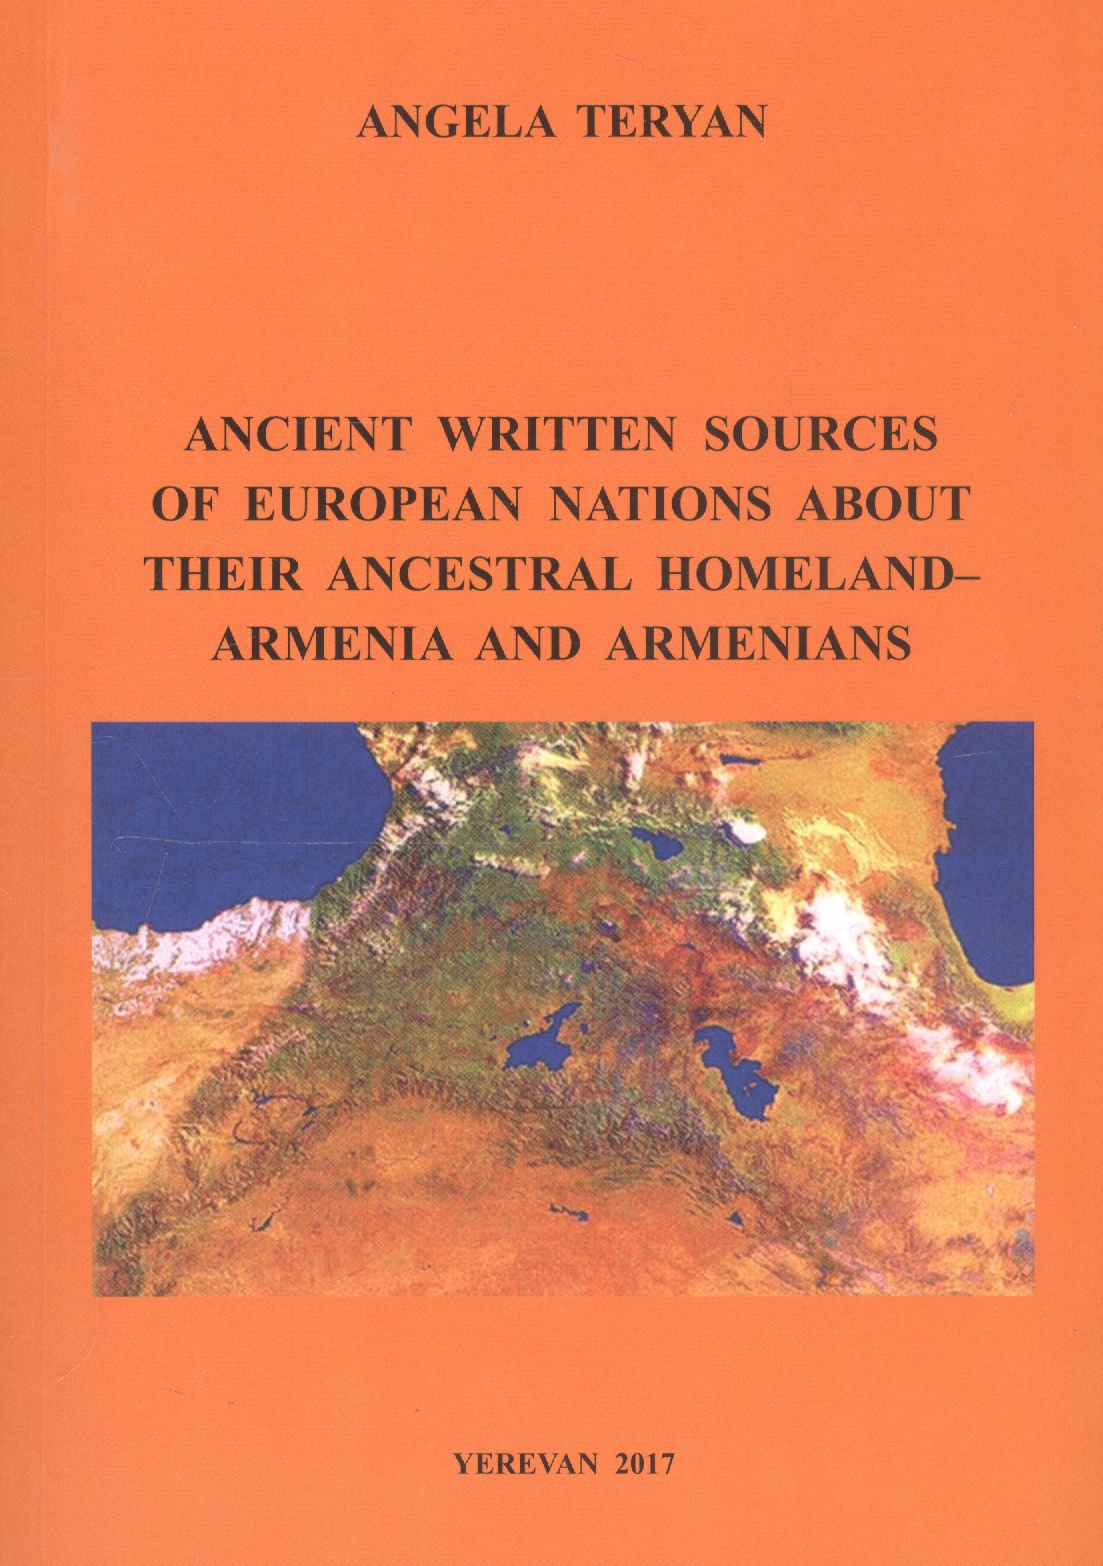 Ancient Written Sourcs of European Nations About their Ancestral Homeland - Armenia and Armenians